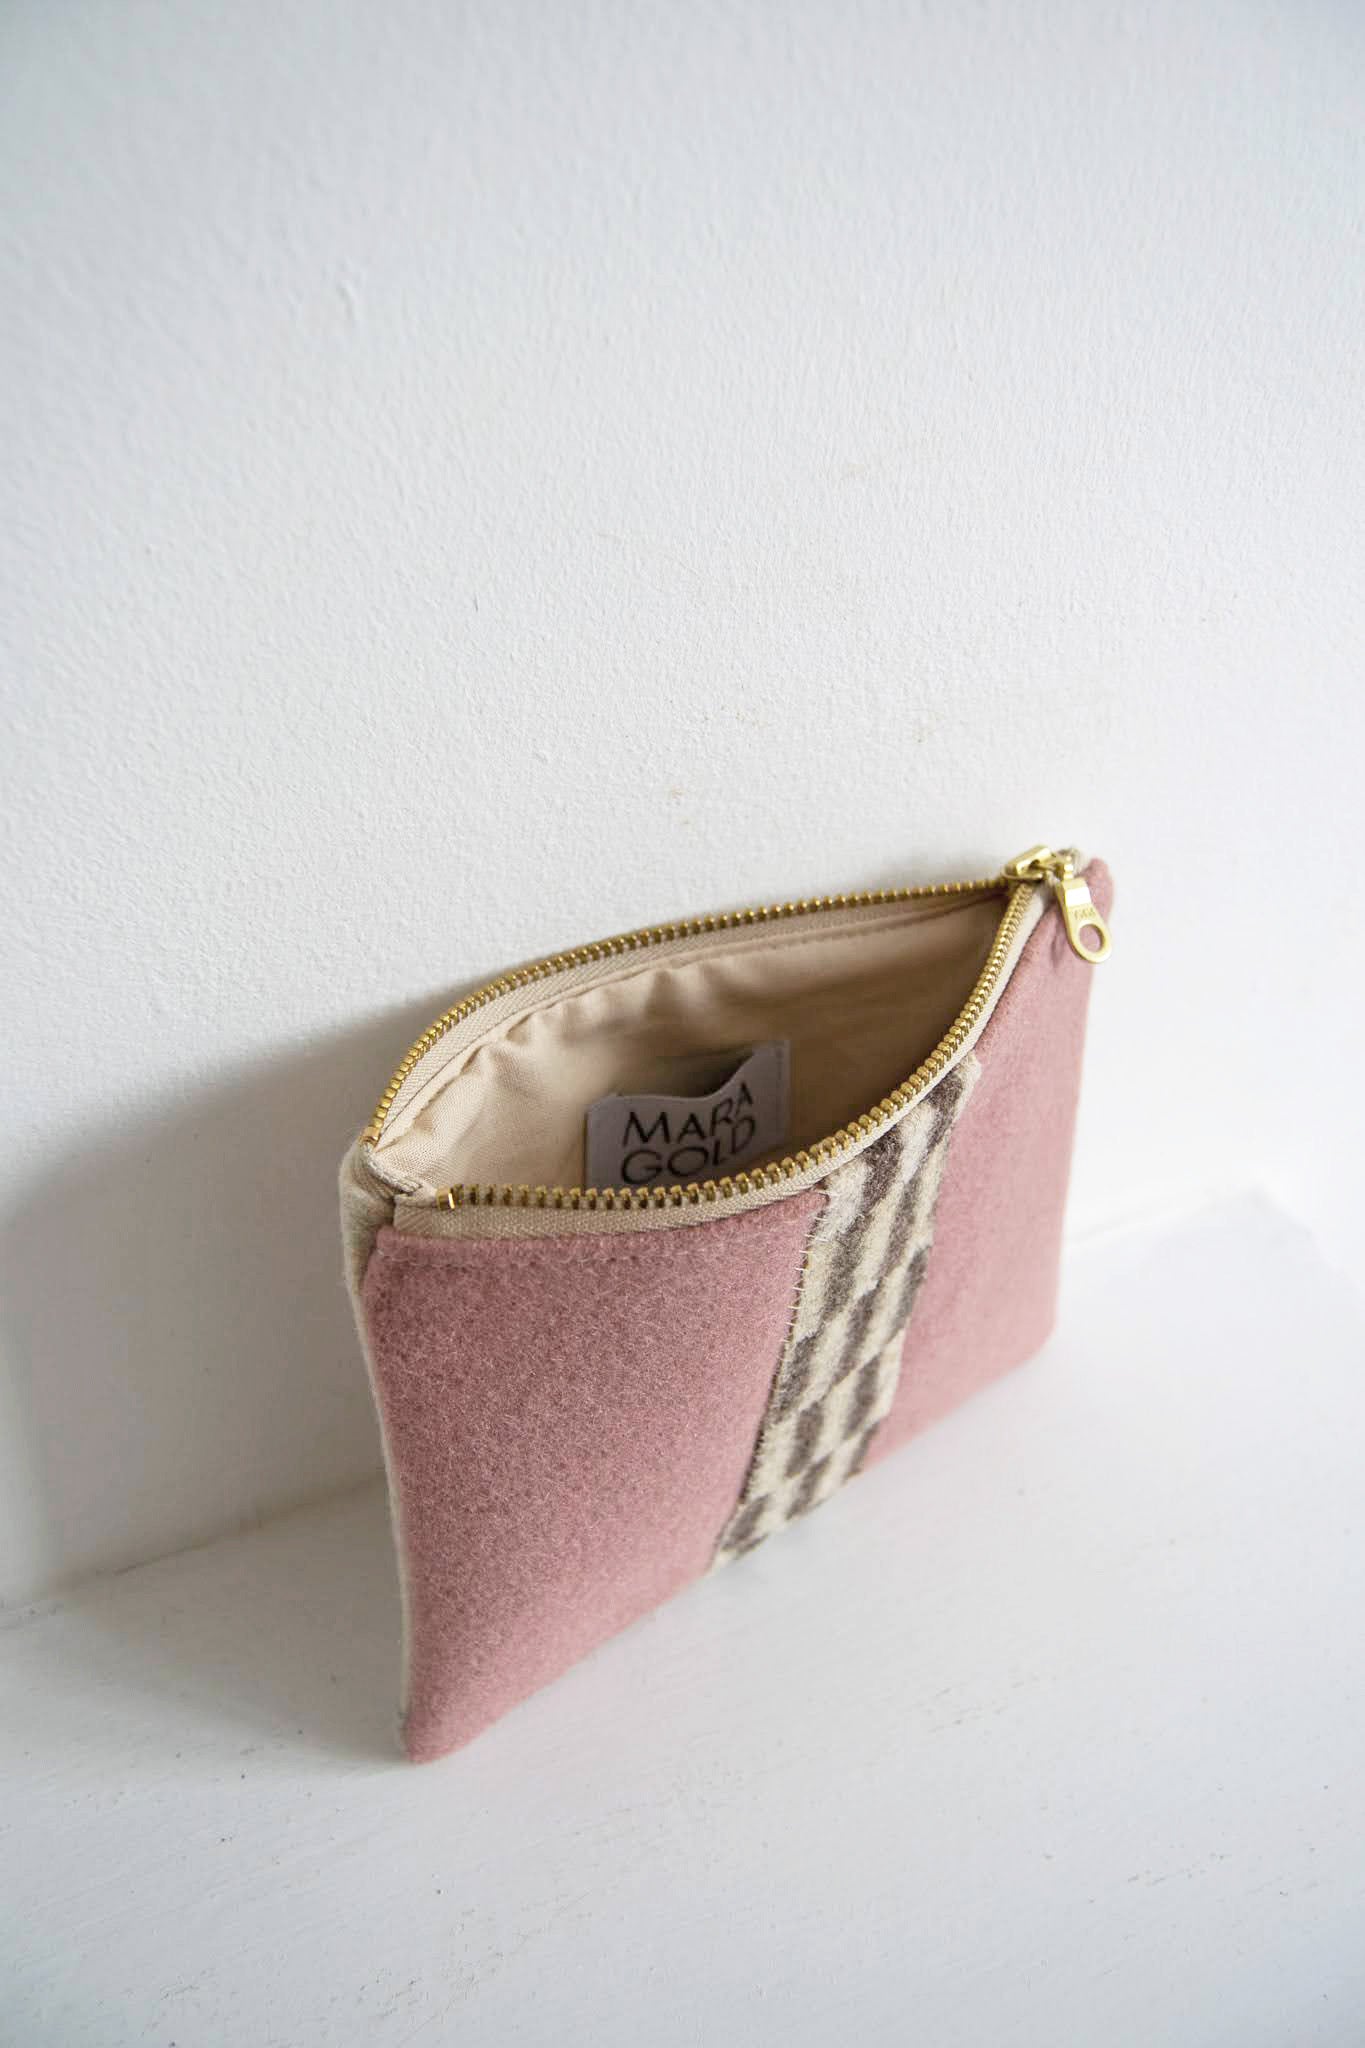 One of a Kind Small Wool Zip Pouch - Dusty Rose & Brown Stripe